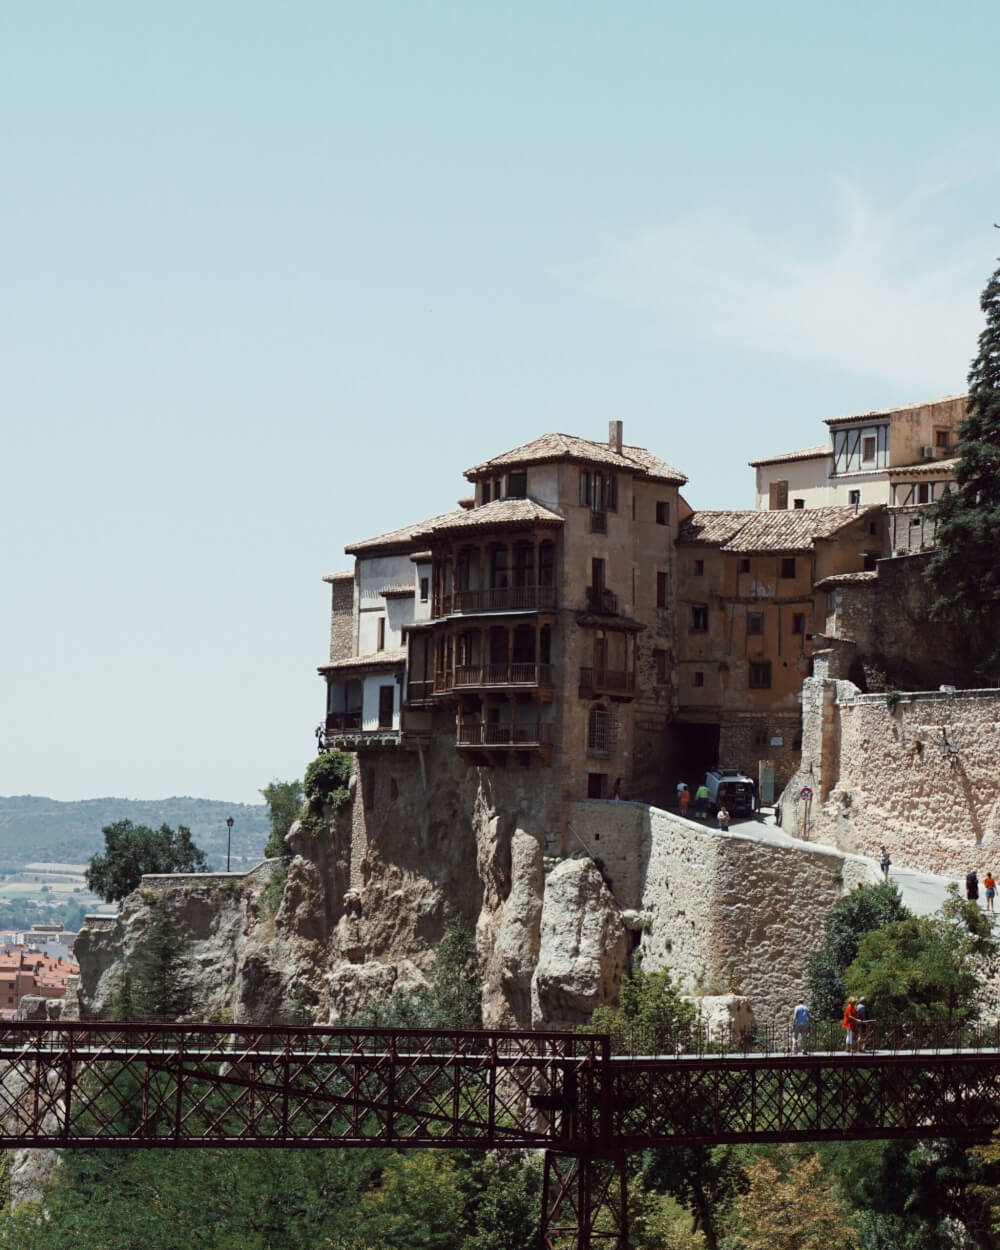 A house is built on the side of a cliff, with the balconies hanging far over the edge. 